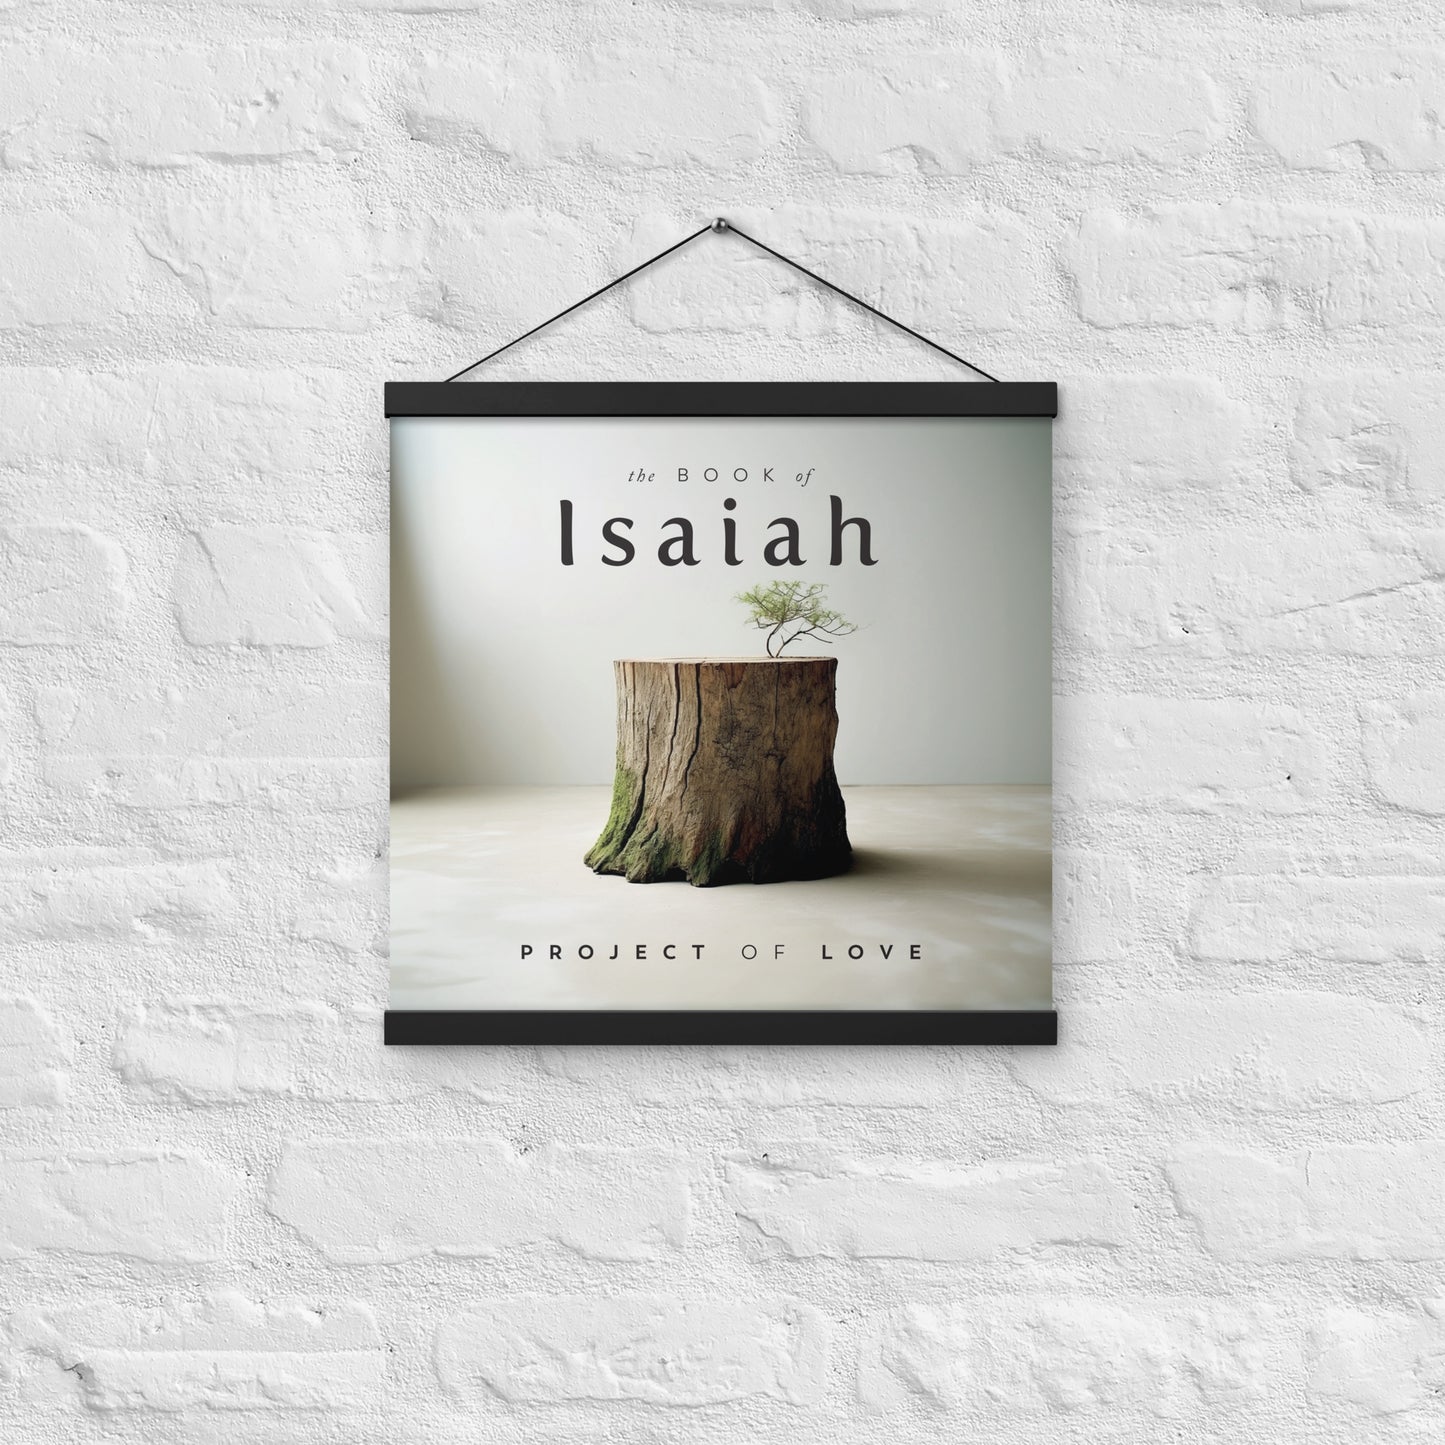 Poster 'The book of Isaiah' with hangers - Designed by Xander